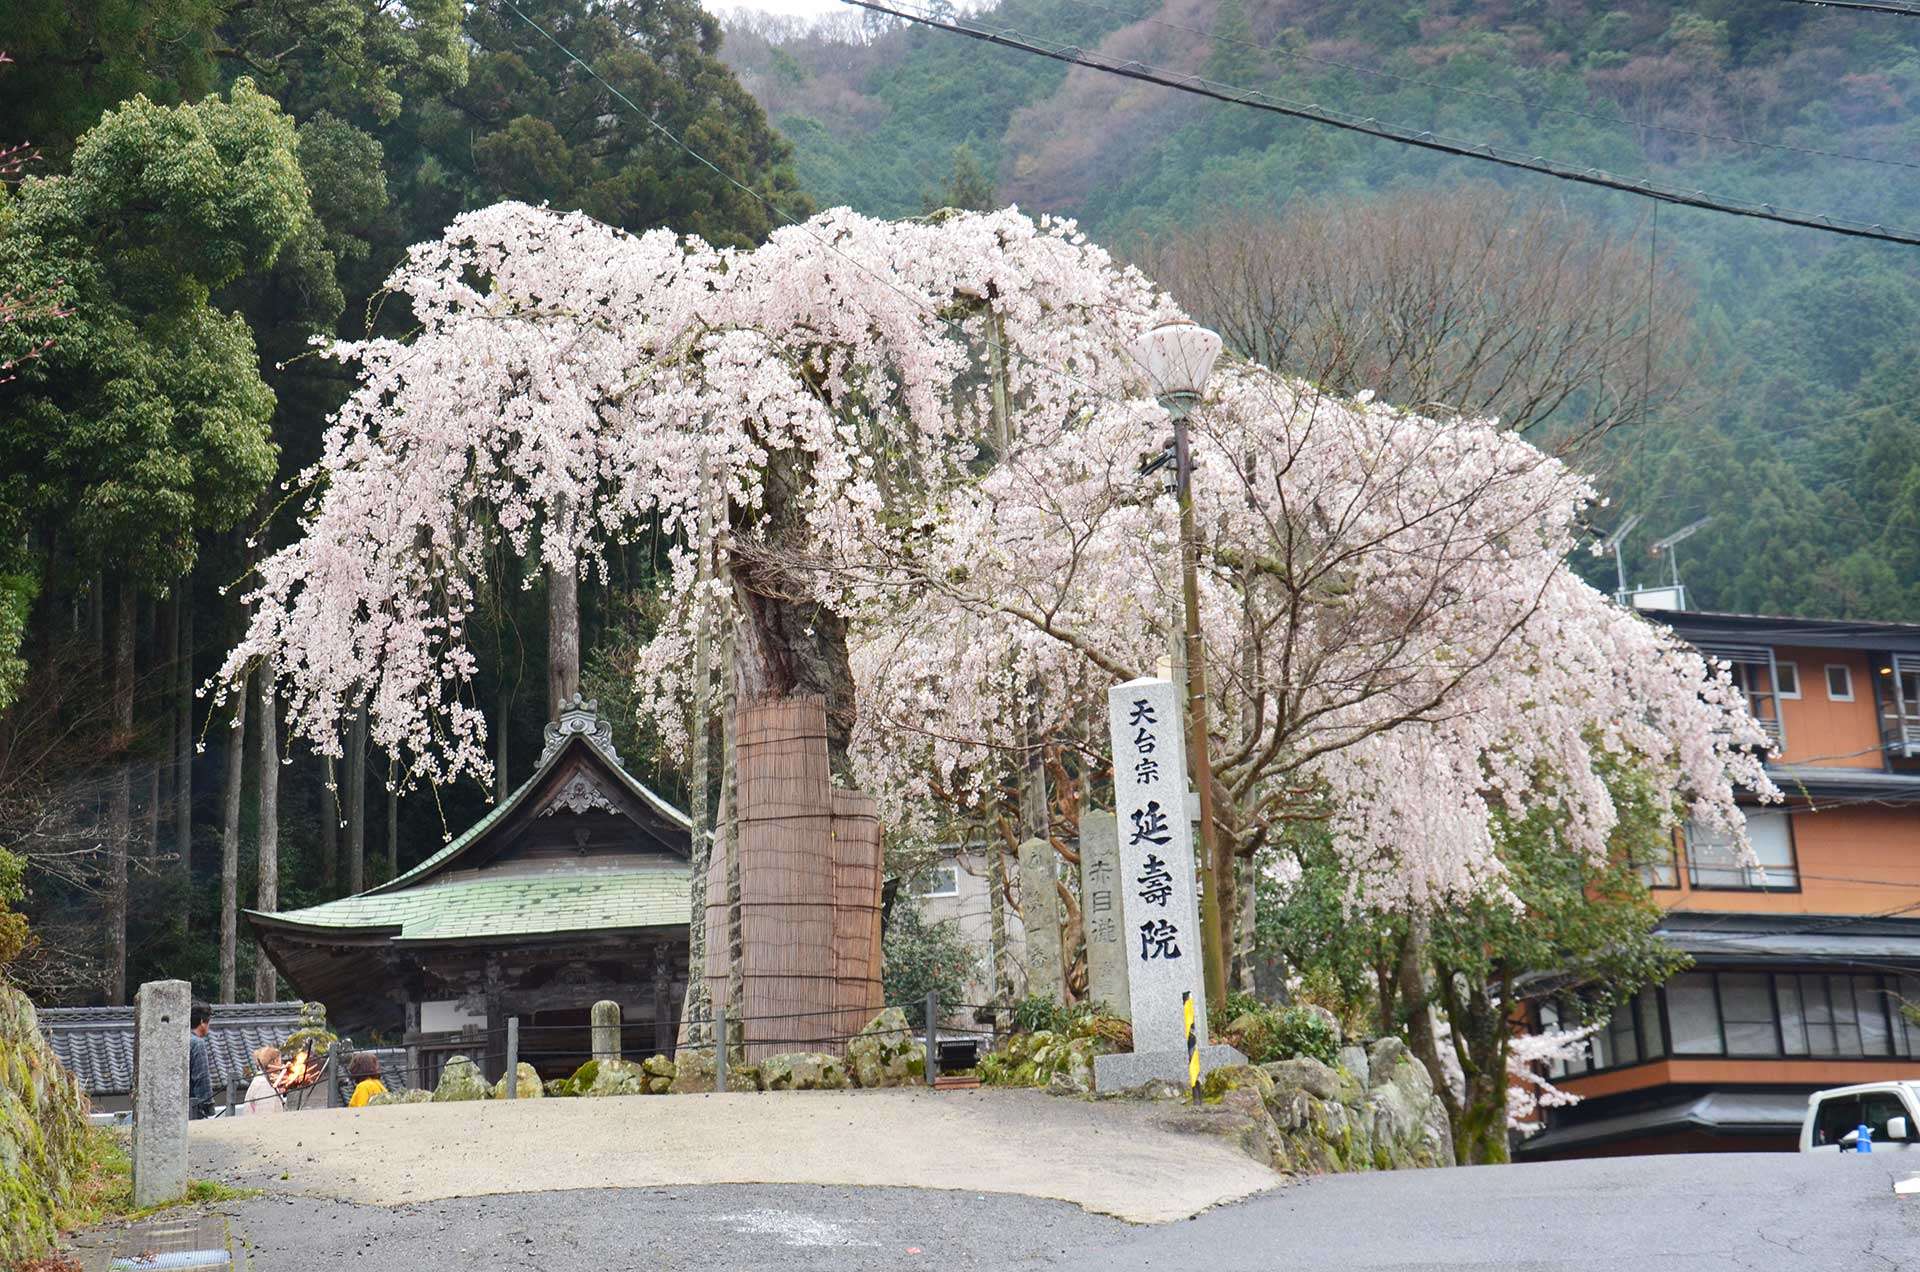 Weeping Cherry Tree at Enjuin Temple